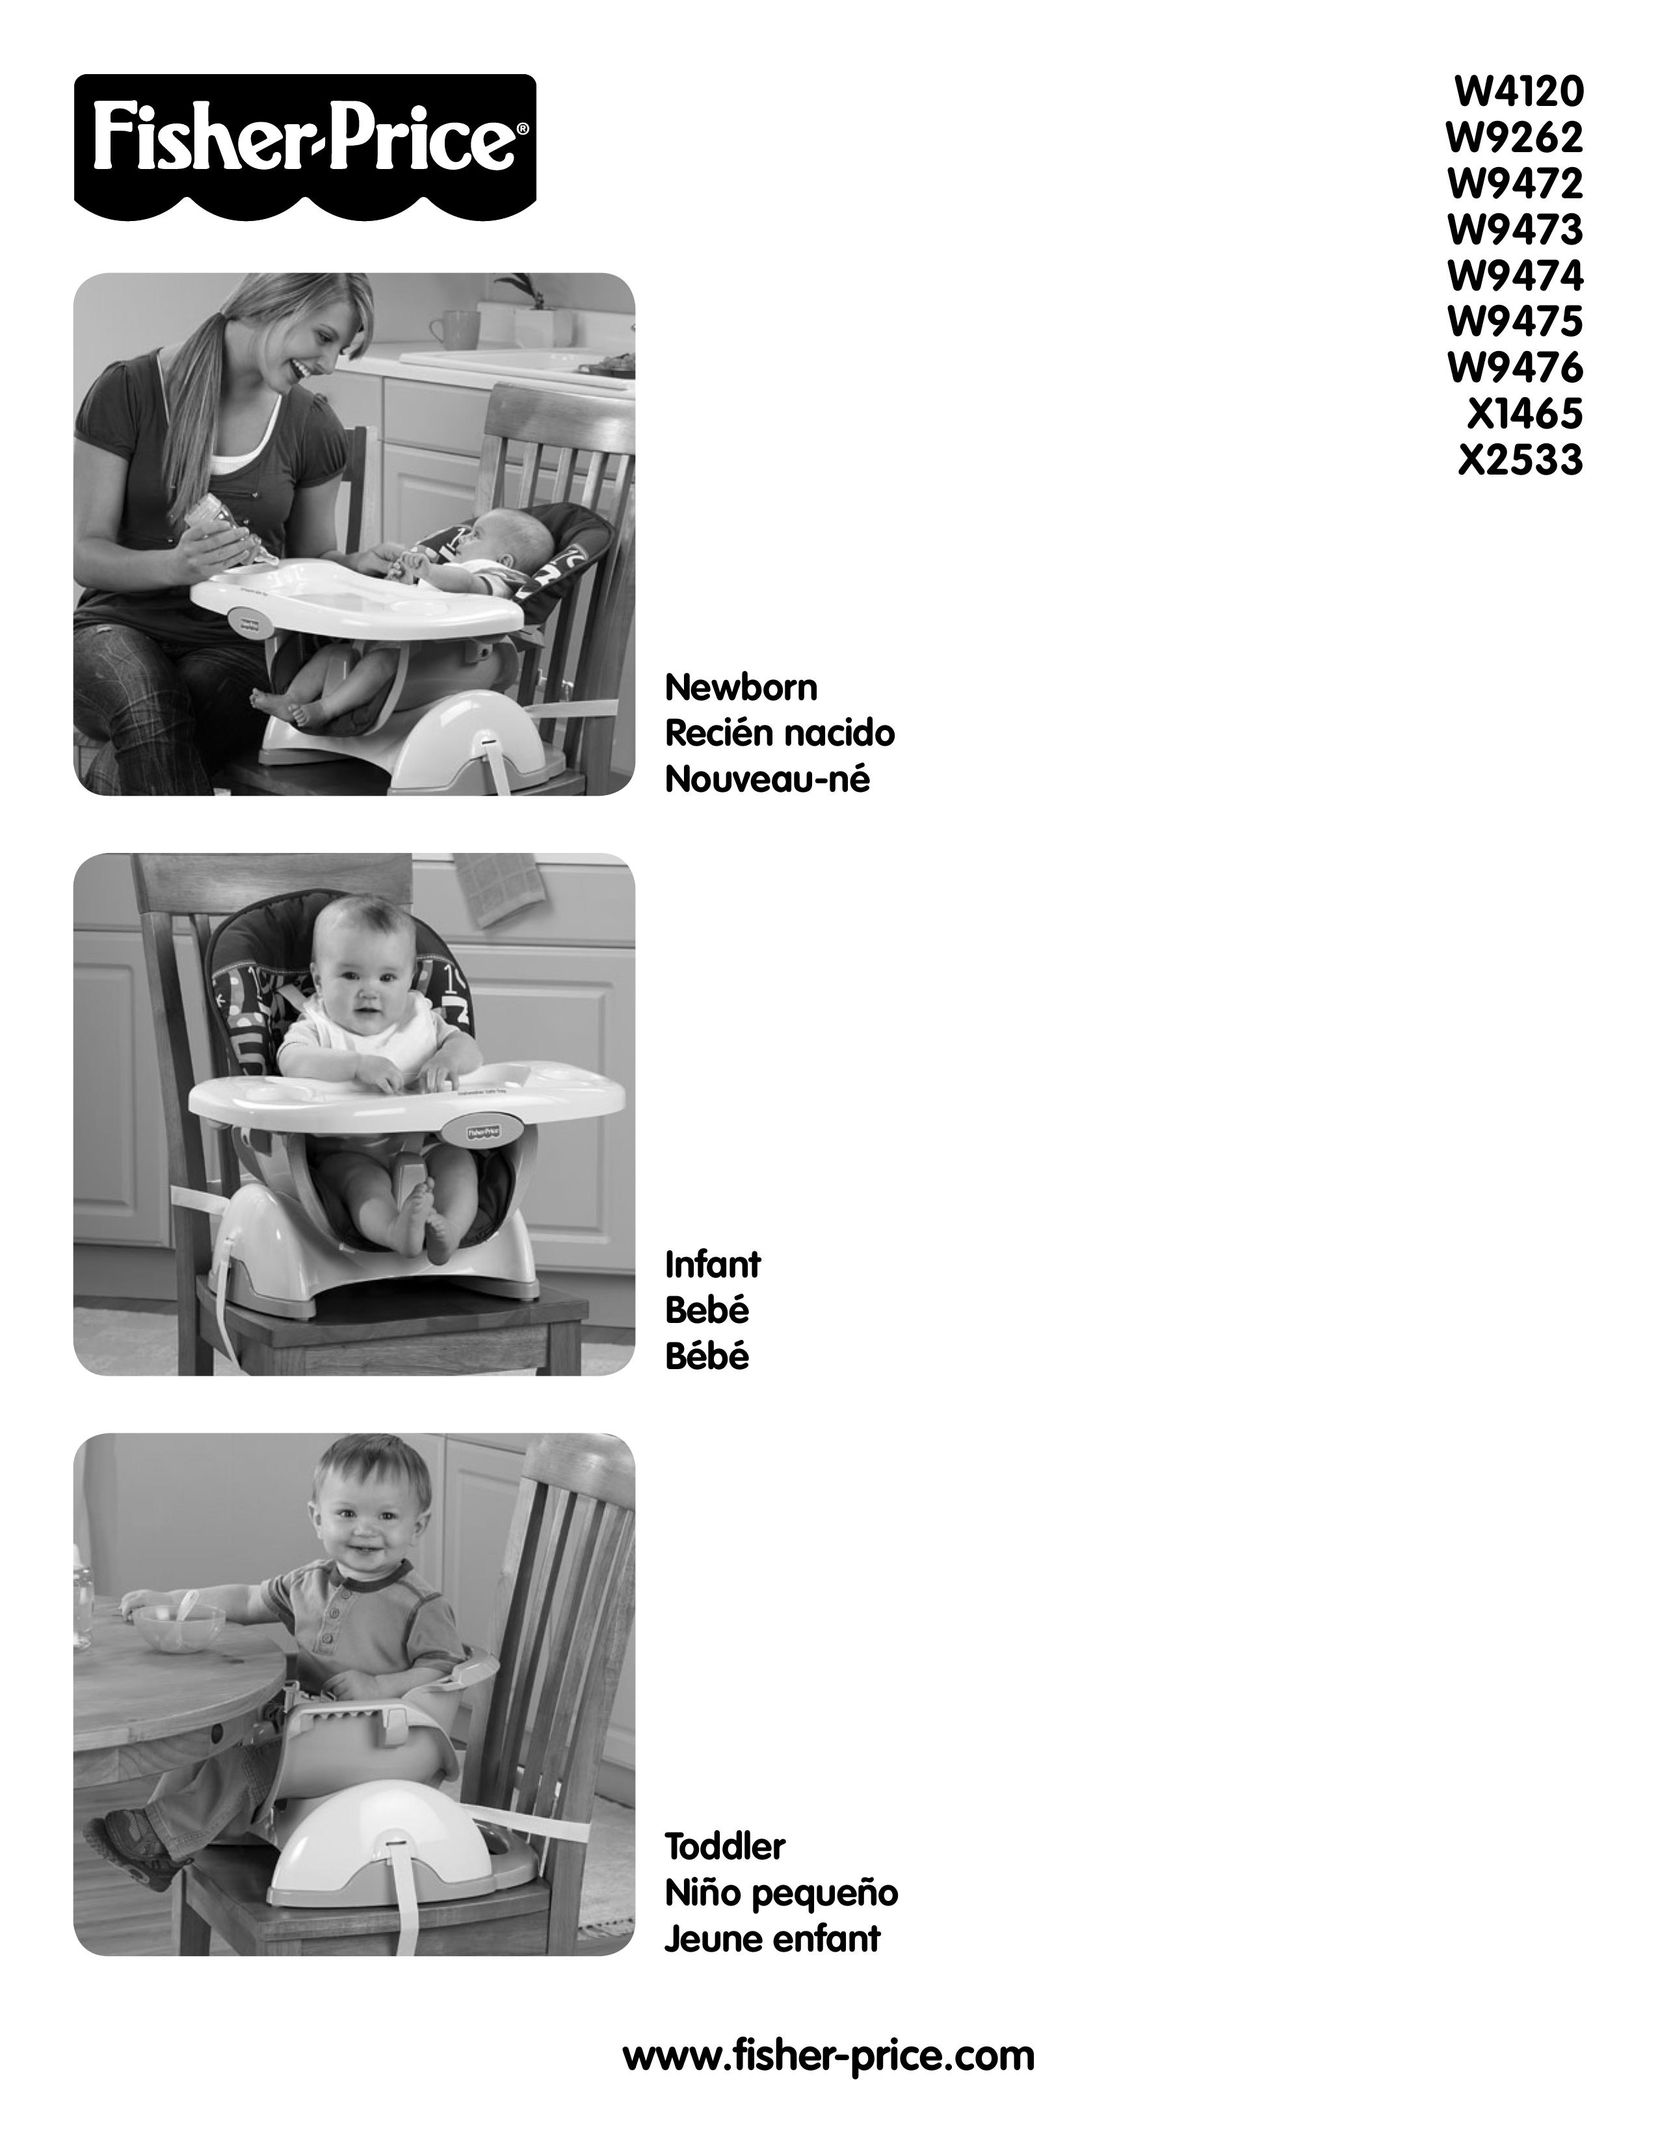 Fisher-Price X2533 High Chair User Manual